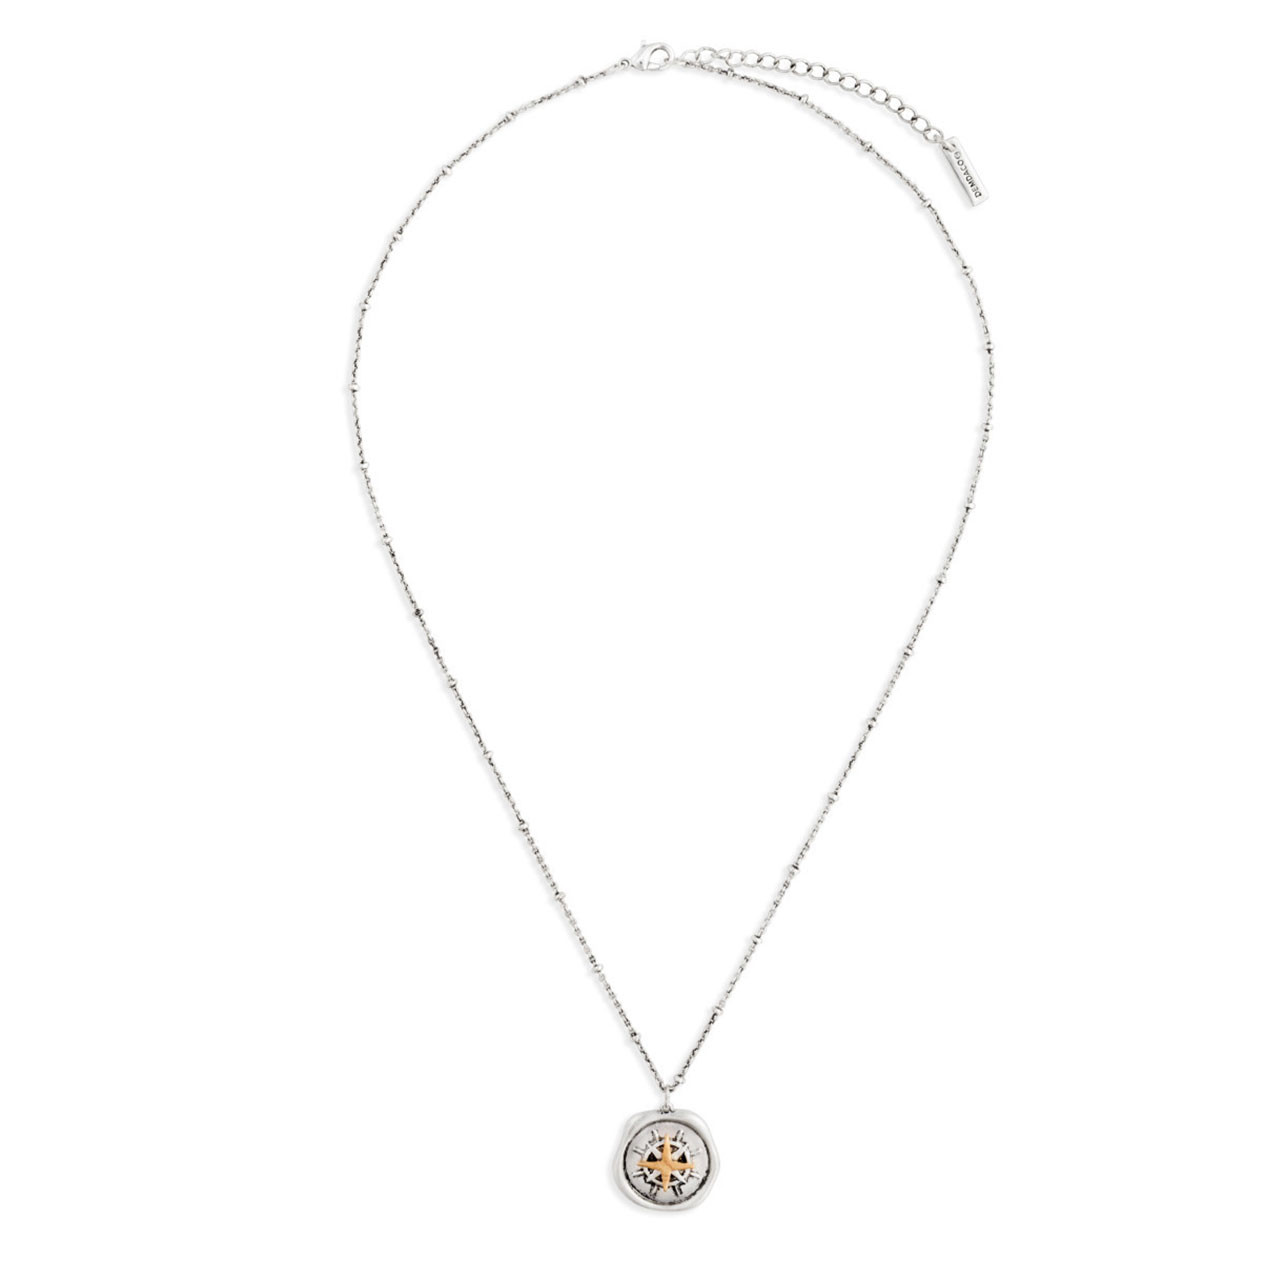 Photo of the entire Life Compass Necklace showing the extender chain